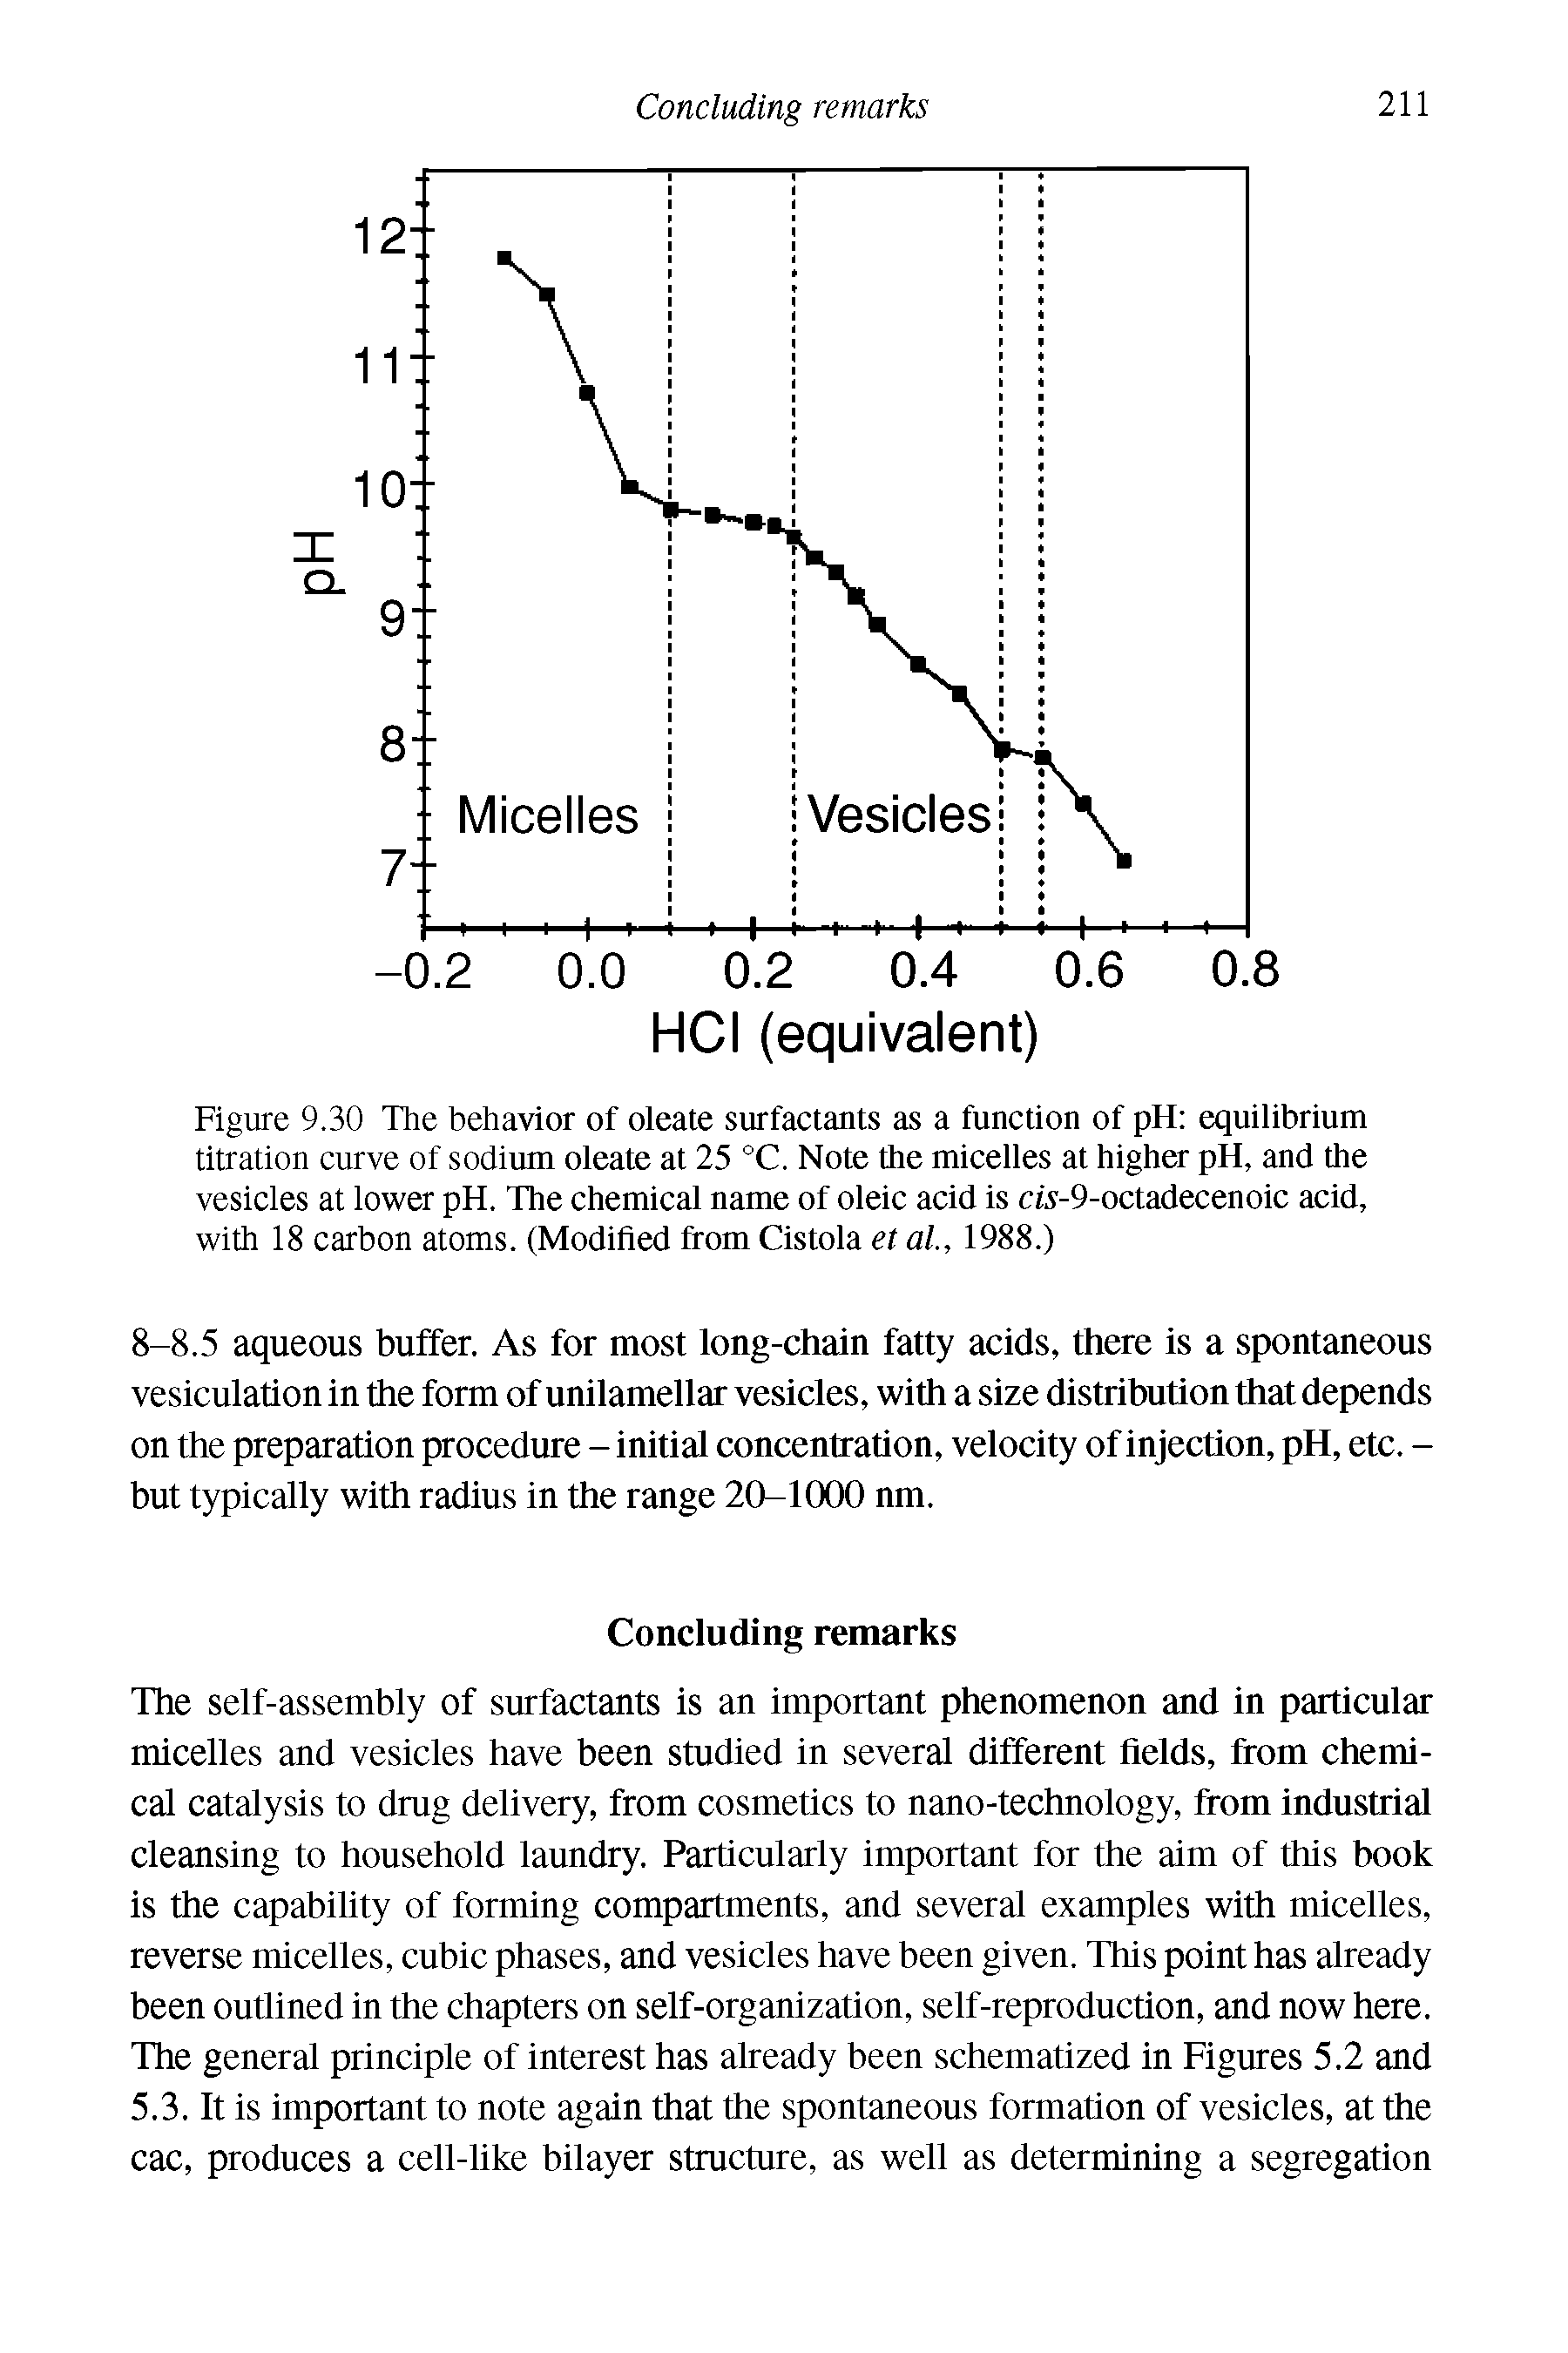 Figure 9.30 The behavior of oleate surfactants as a function of pH equilibrium titration curve of sodium oleate at 25 °C. Note the micelles at higher pH, and the vesicles at lower pH. The chemical name of oleic acid is ctT-9-octadecenoic acid, with 18 carbon atoms. (Modified from Cistola et al, 1988.)...